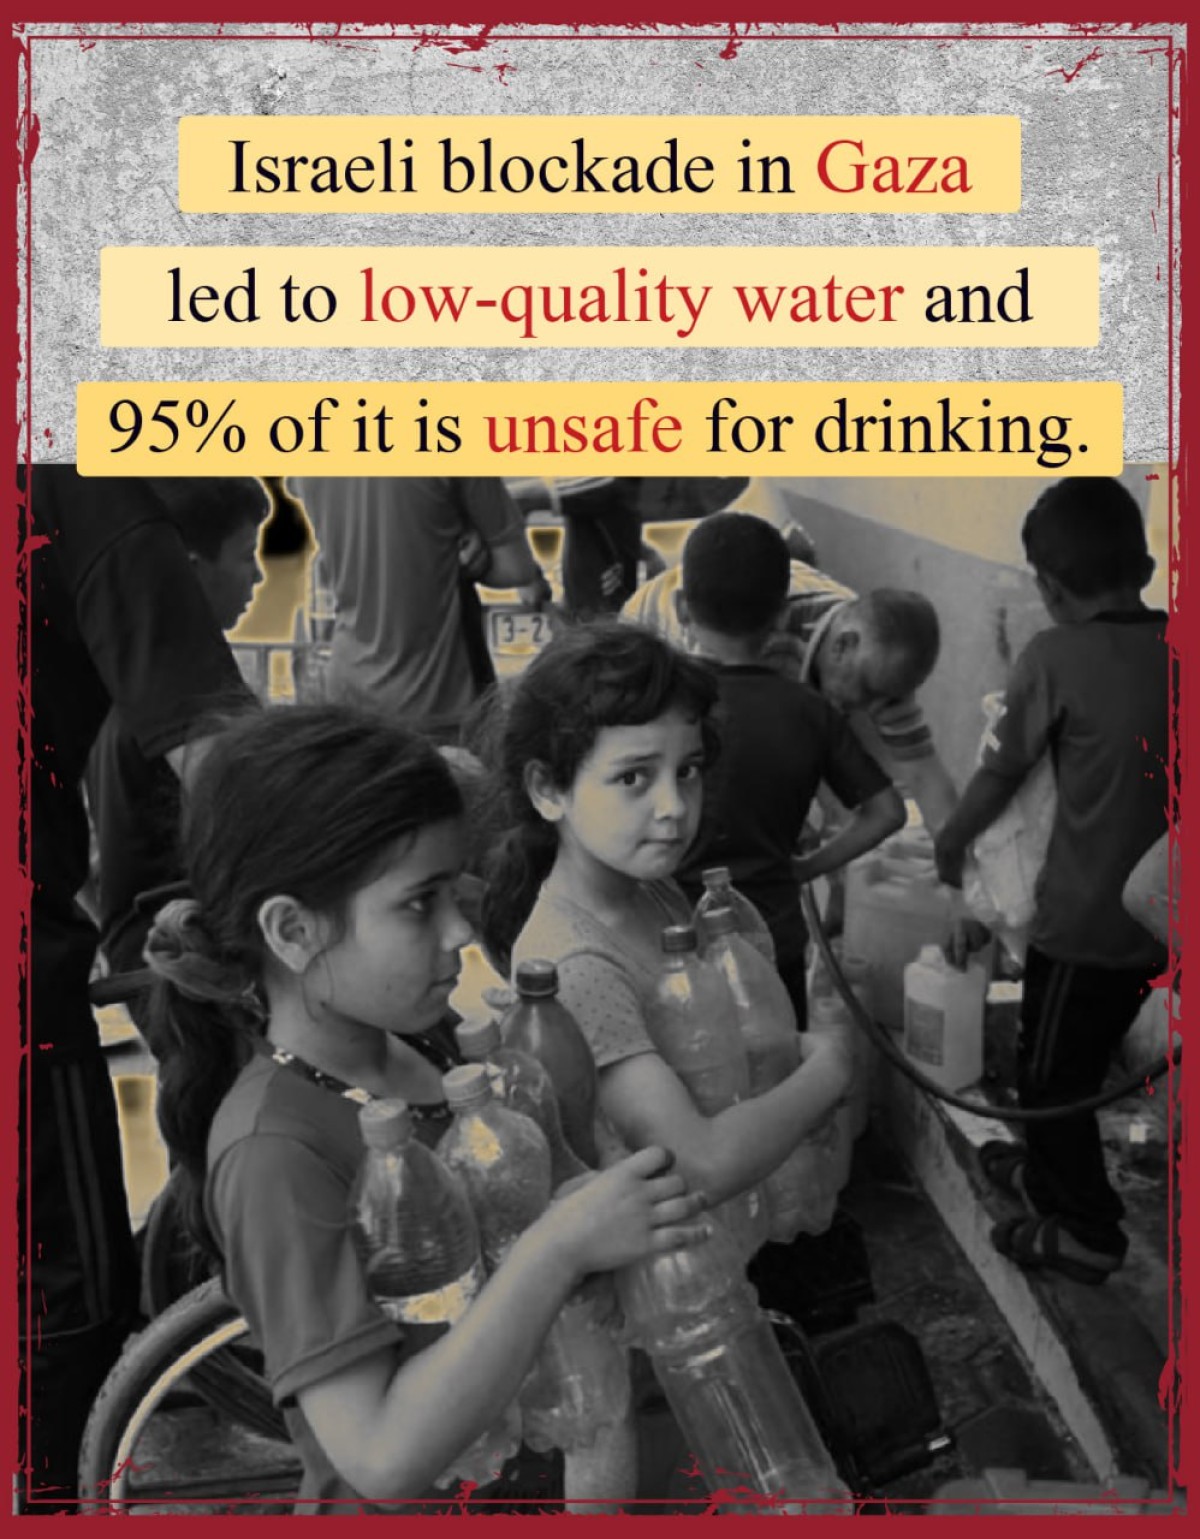 Israeli blockade in Gaza led to low-quality water and 95% of it is unsafe for drinking.